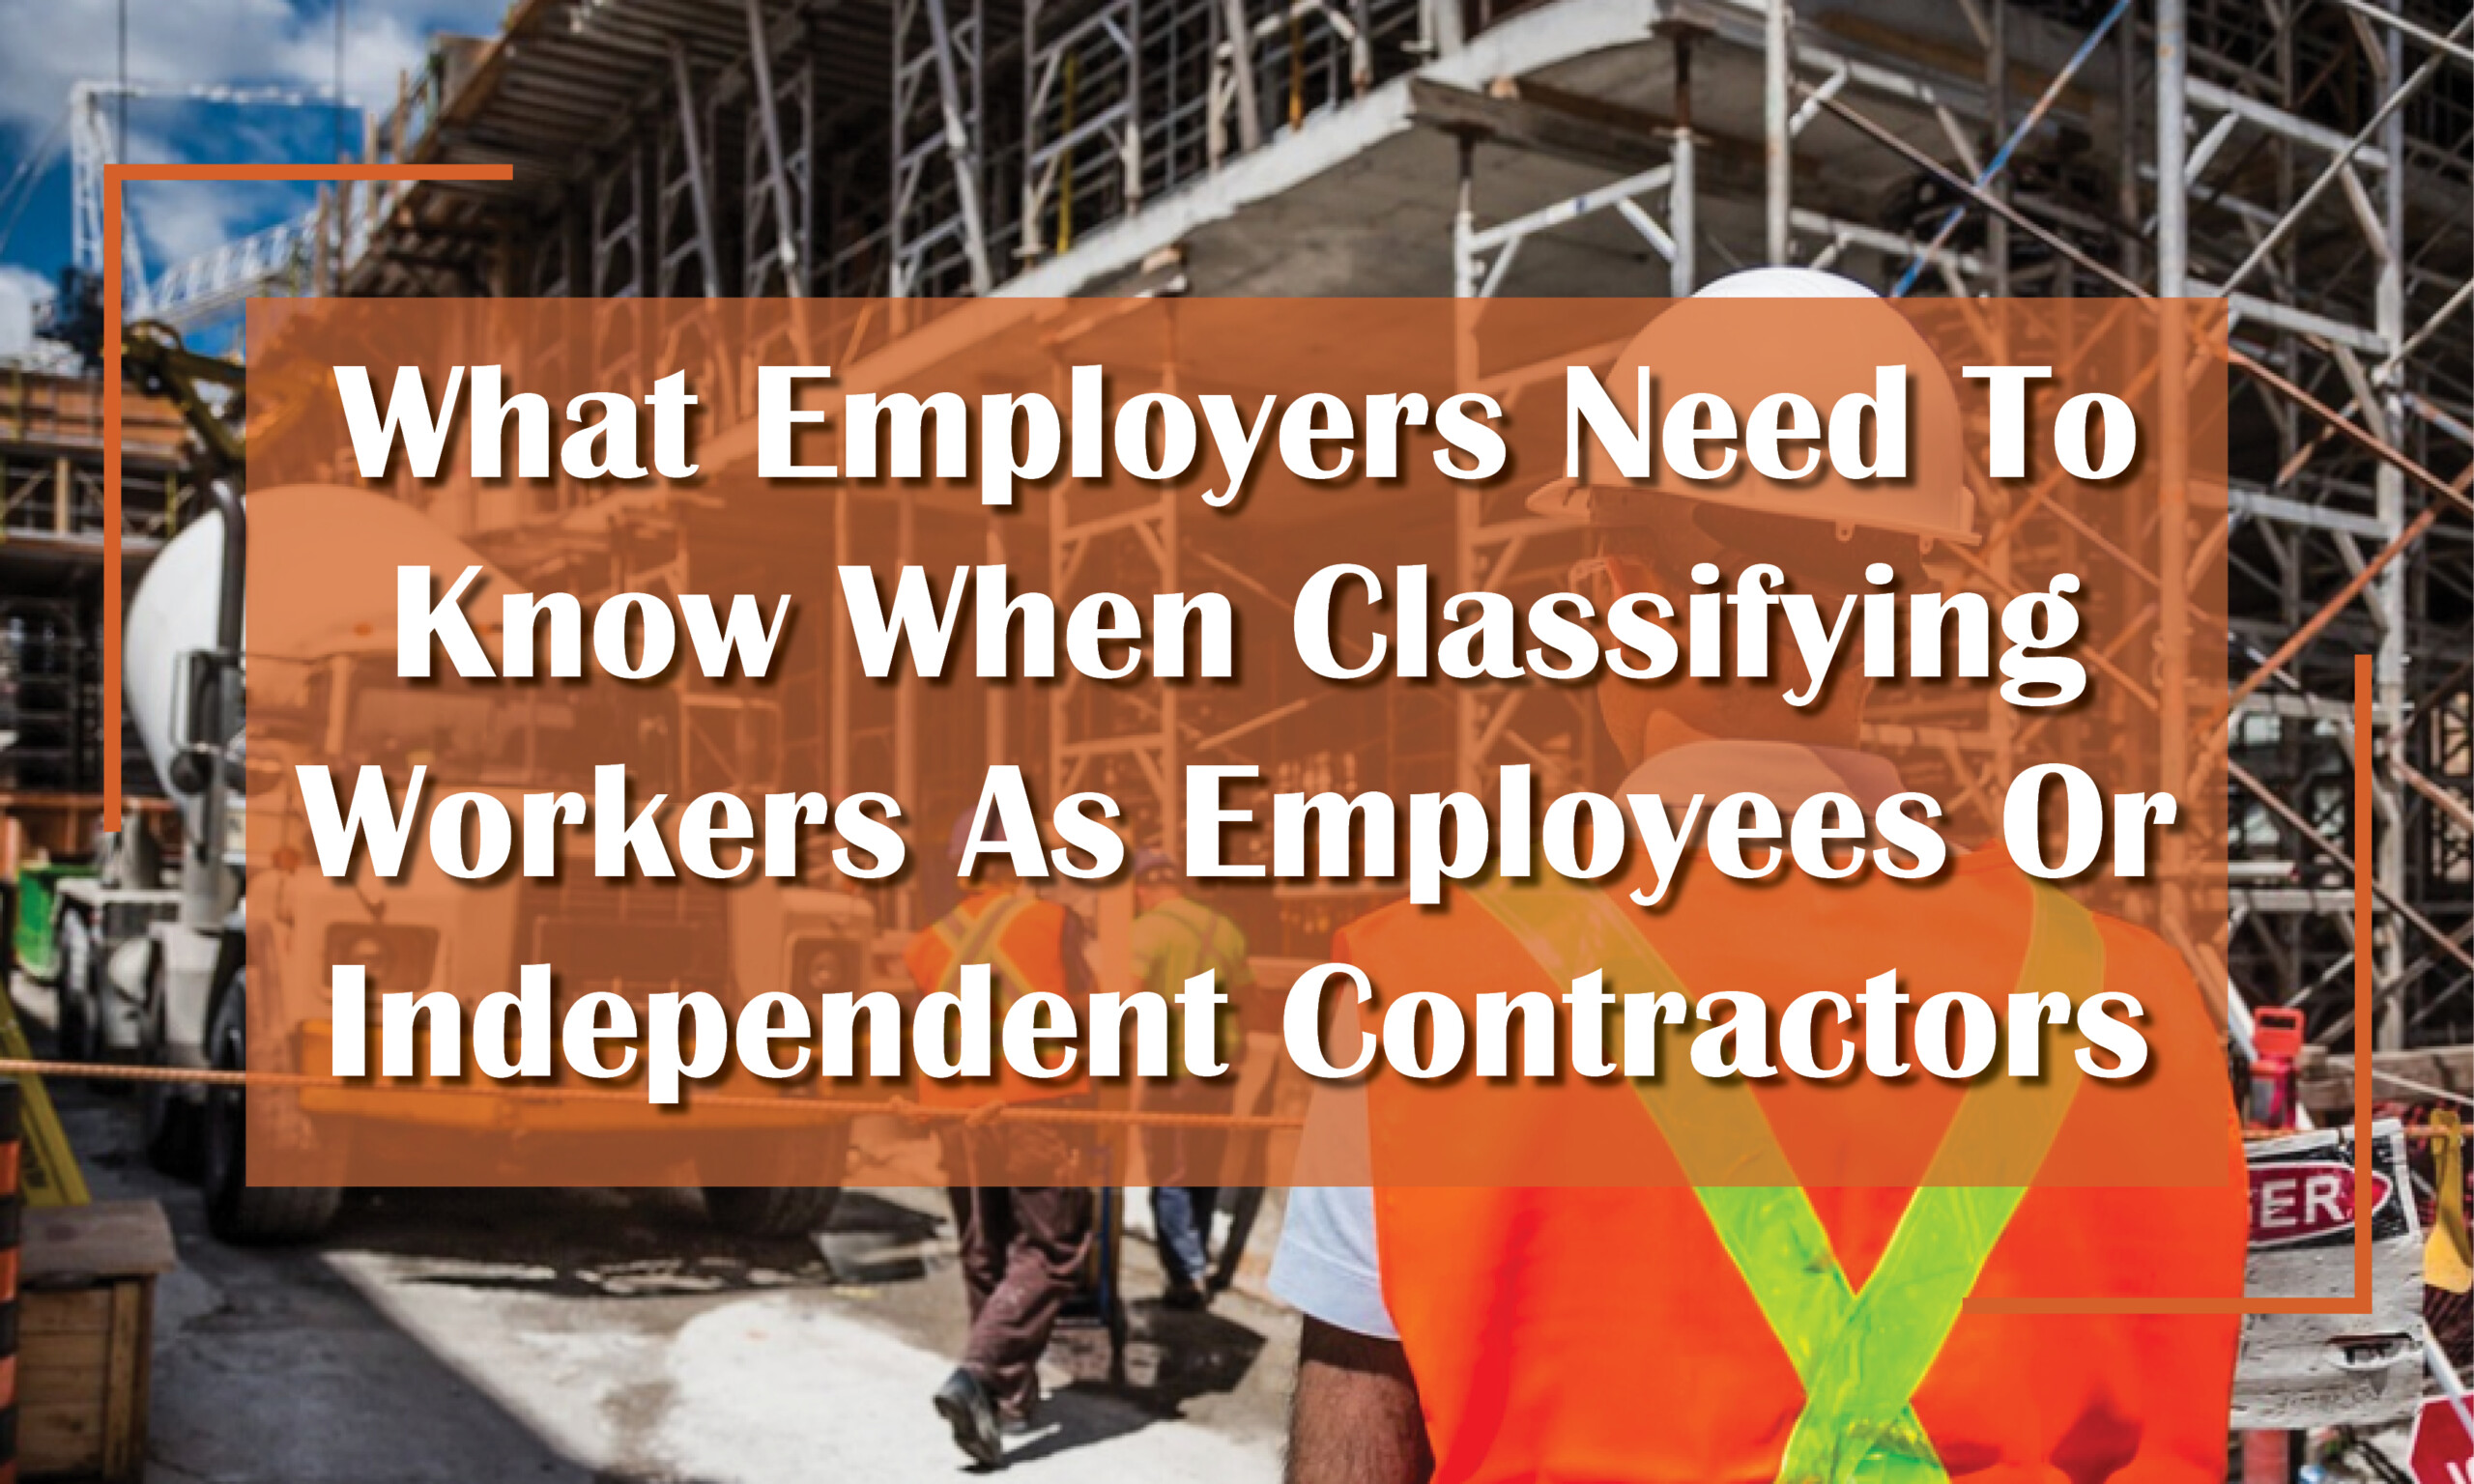 Employees or Independent Contractors